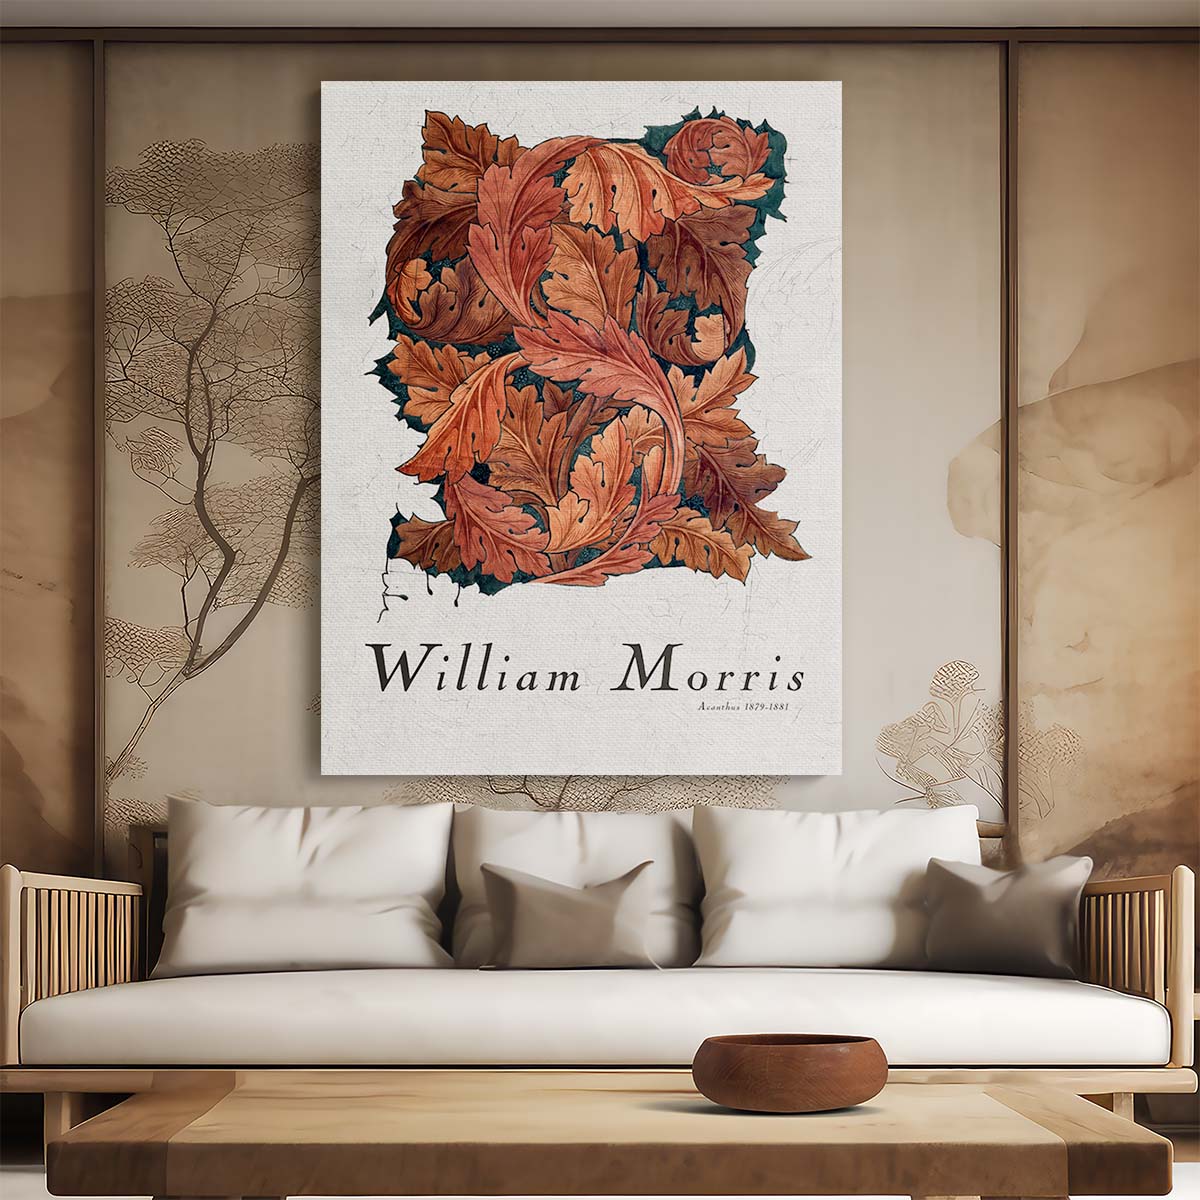 Vintage Acanthus Illustration by William Morris - Inspirational Typography Art Poster by Luxuriance Designs, made in USA